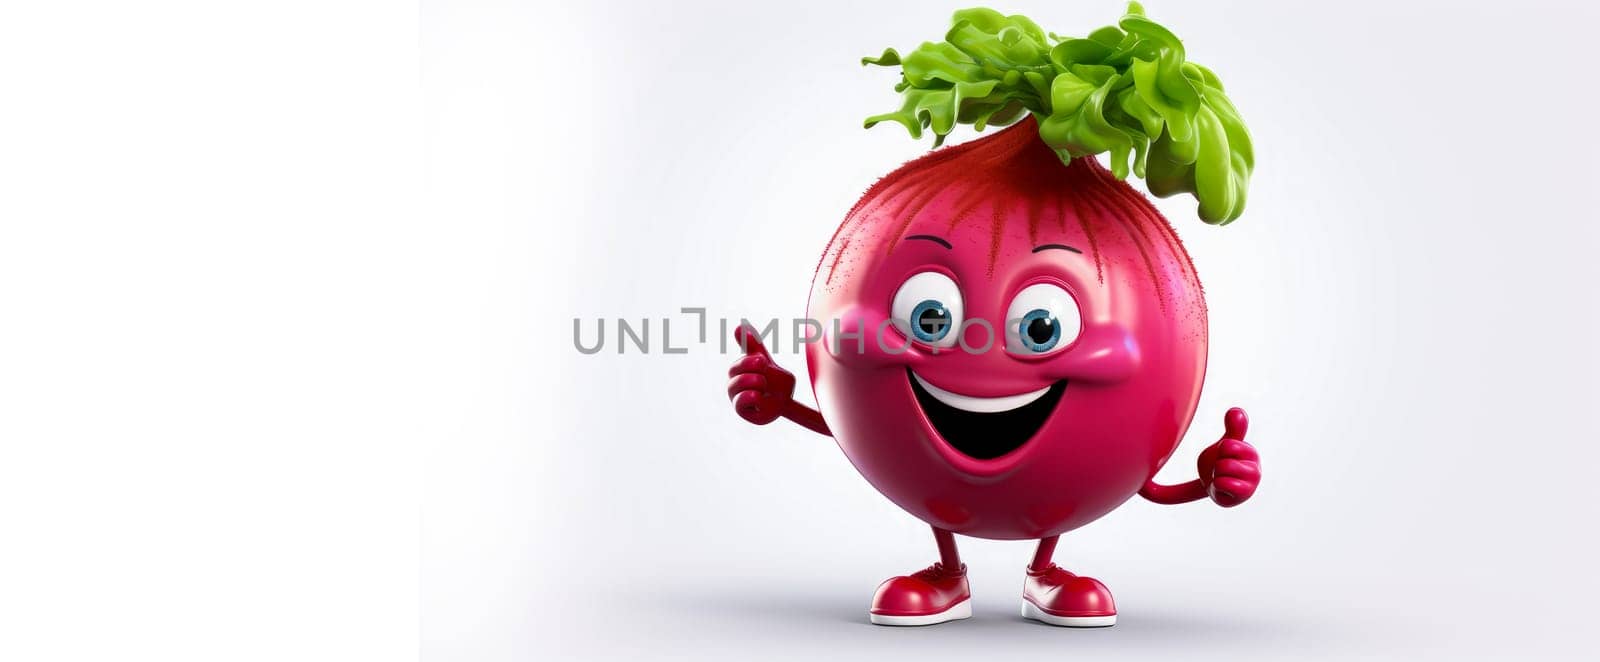 Purple beet with a cheerful face 3D on a white background. Cartoon characters, three-dimensional character, healthy lifestyle, proper nutrition, diet, fresh vegetables and fruits, vegetarianism, veganism, food, breakfast, fun, laughter, banner